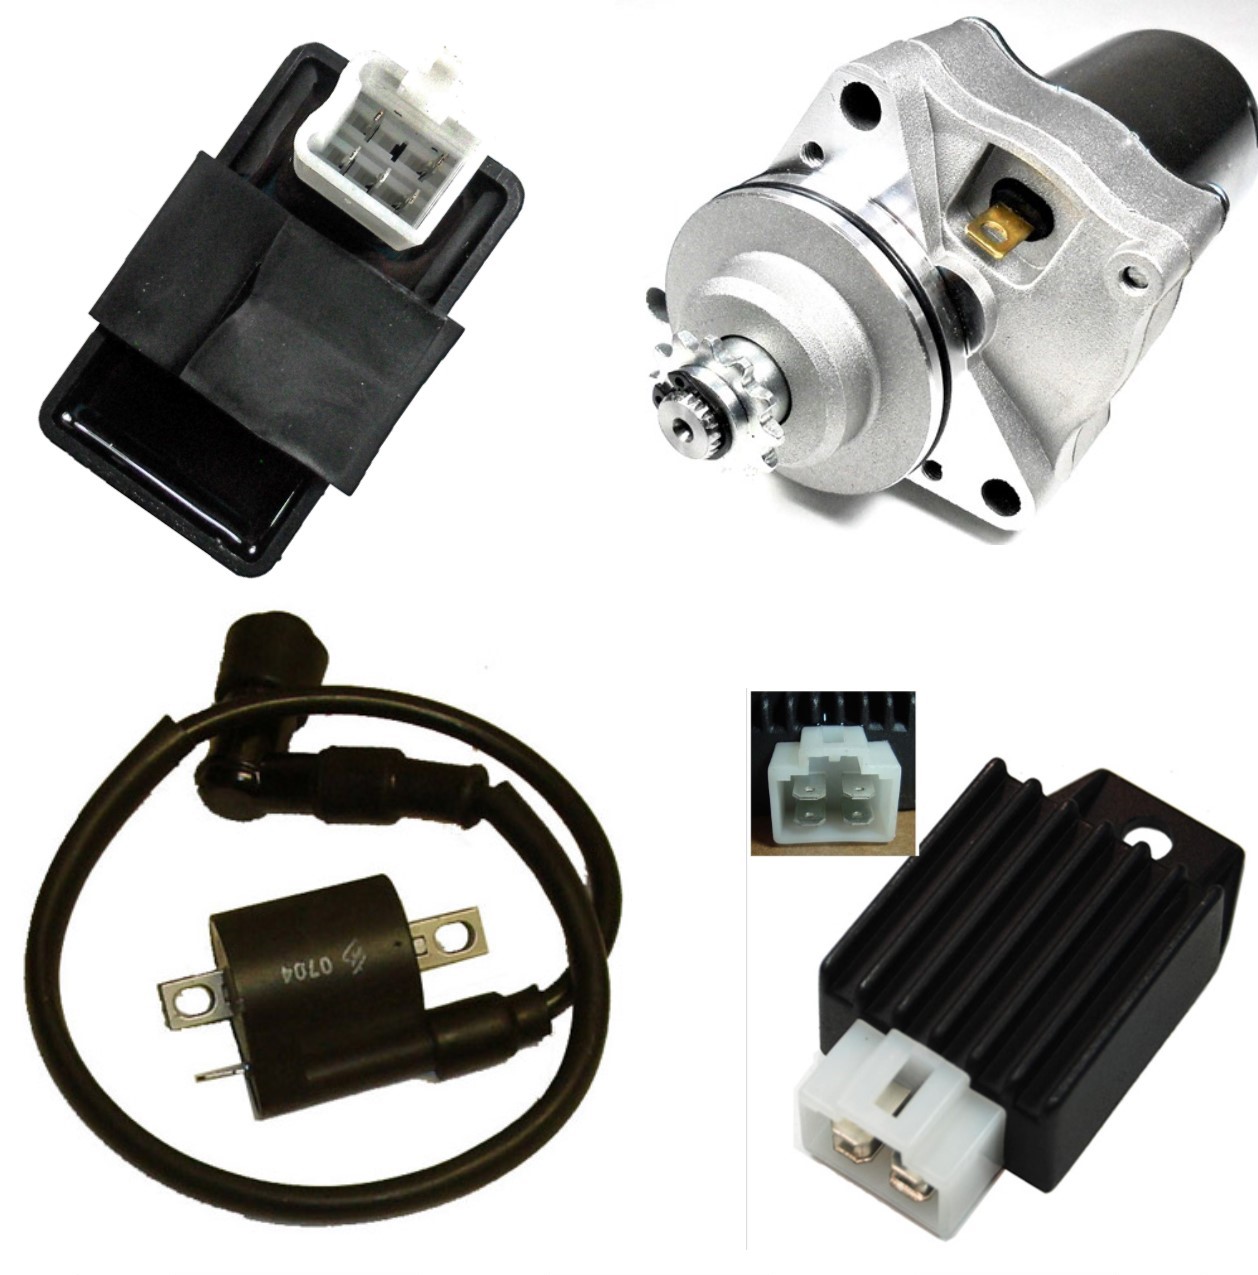 Electrical Parts Starters-CDI-Coils-Relays-Stators 50cc ATV-Dirtbikes